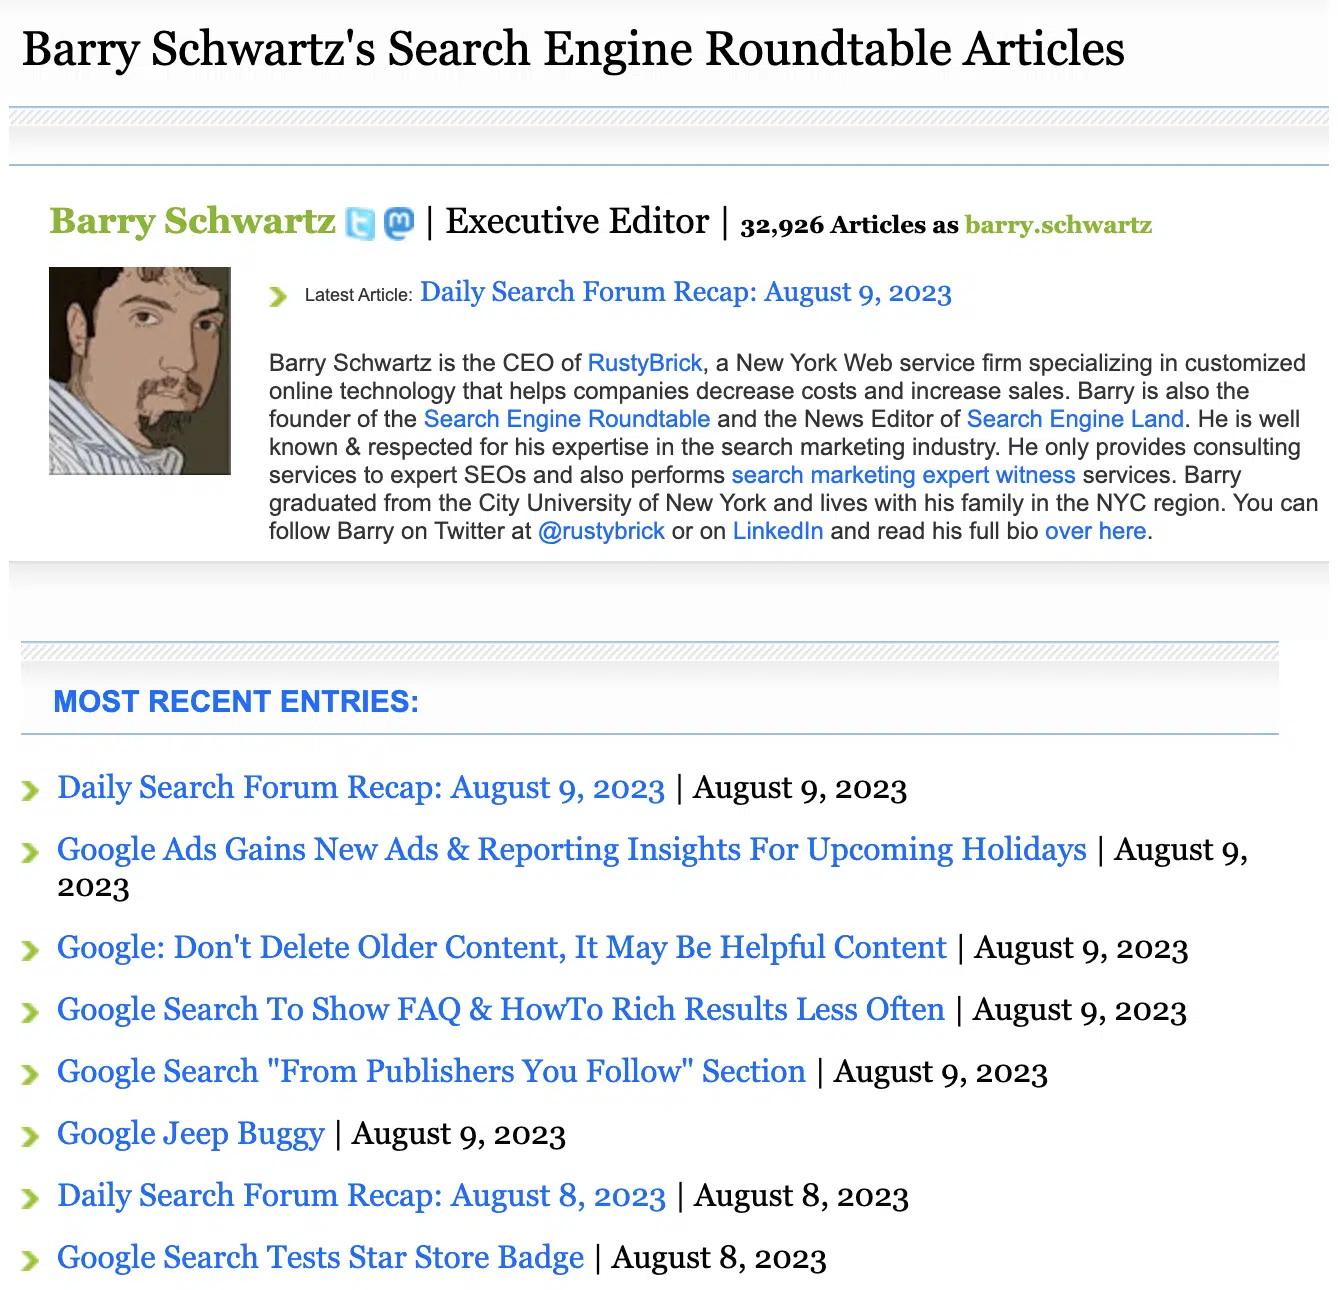 Barry Schwartz's author page on Search Engine Roundtable